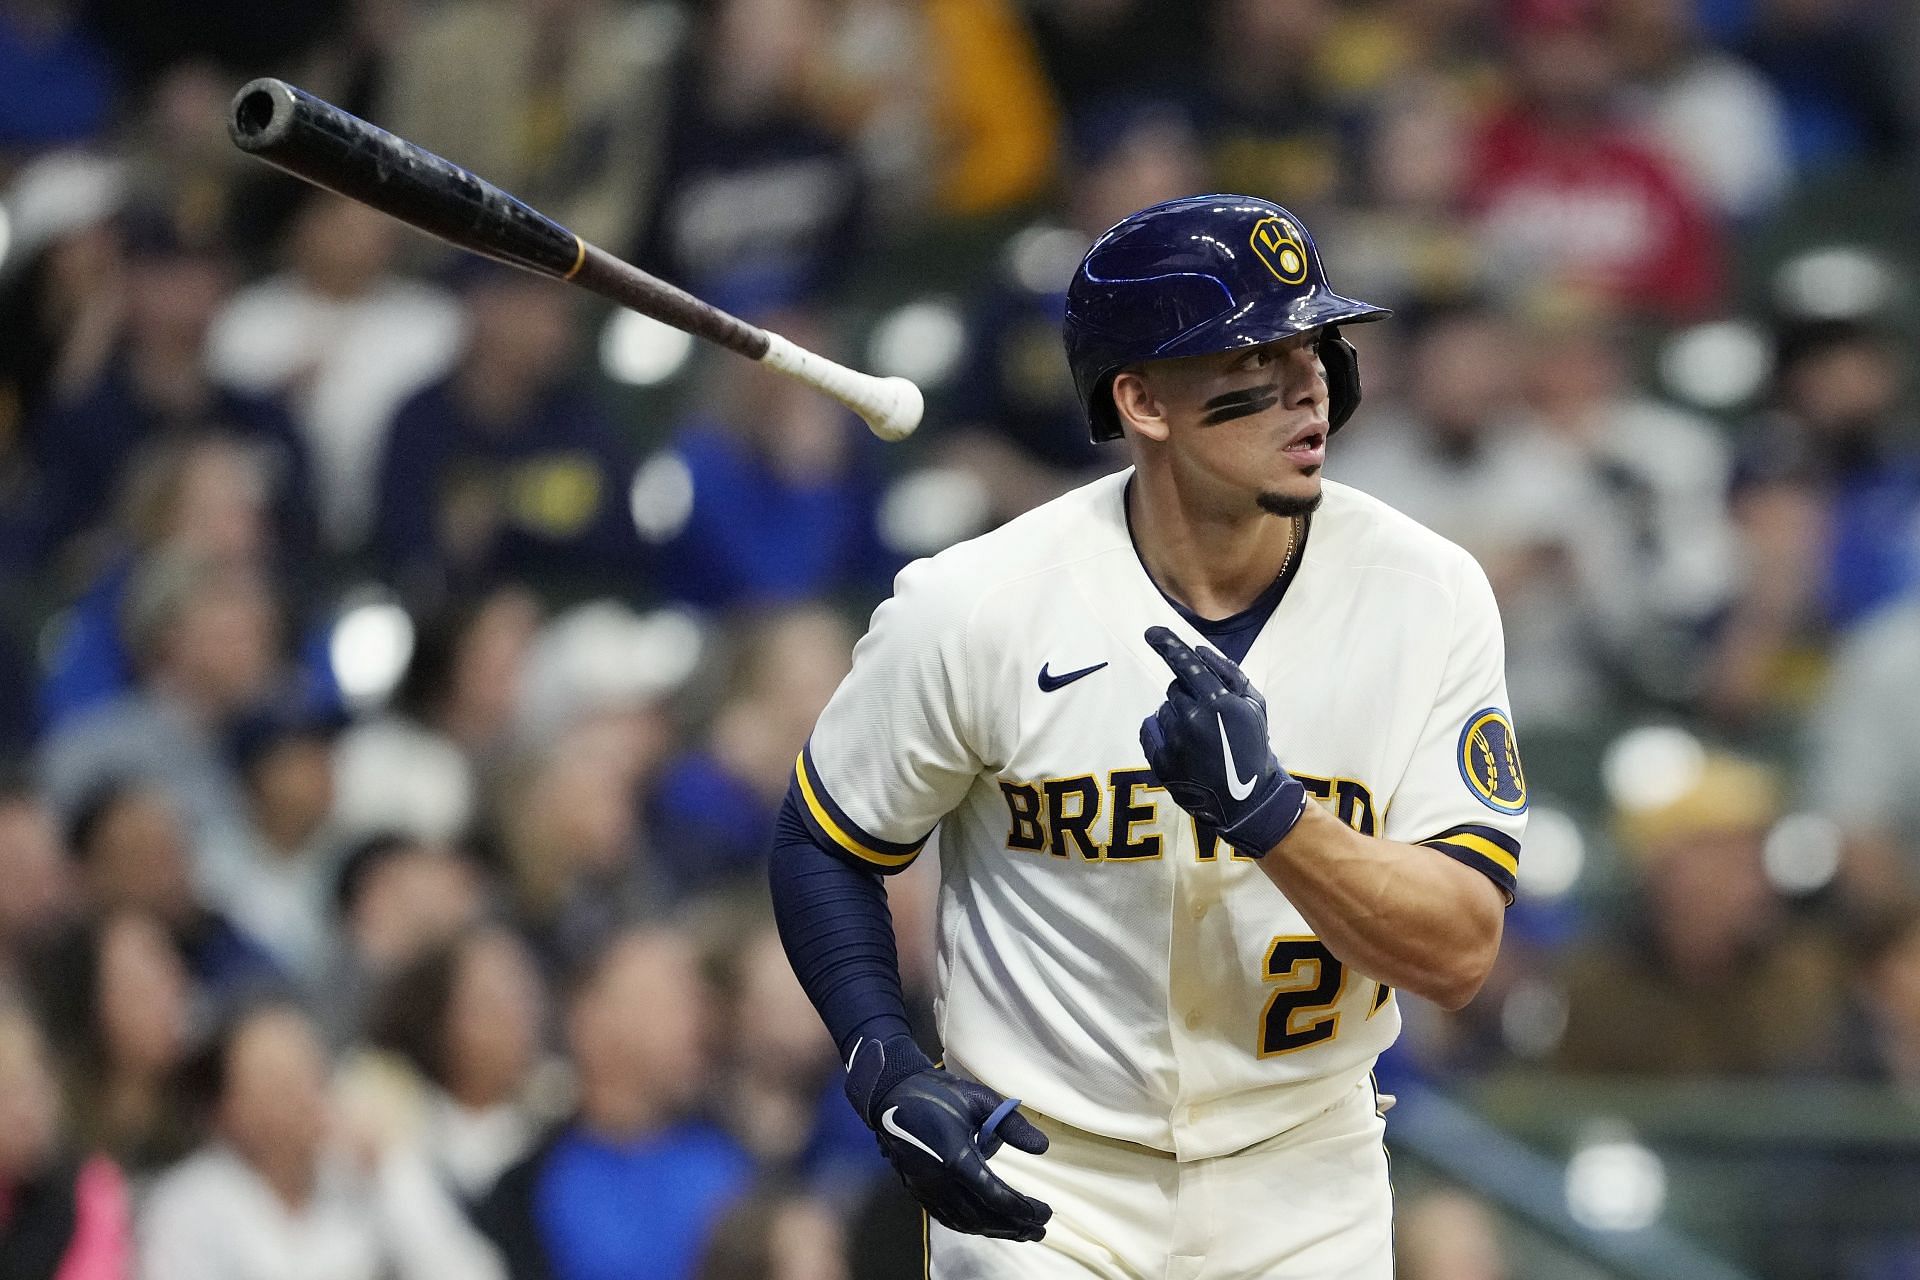 The Milwaukee Brewers Willy Adames